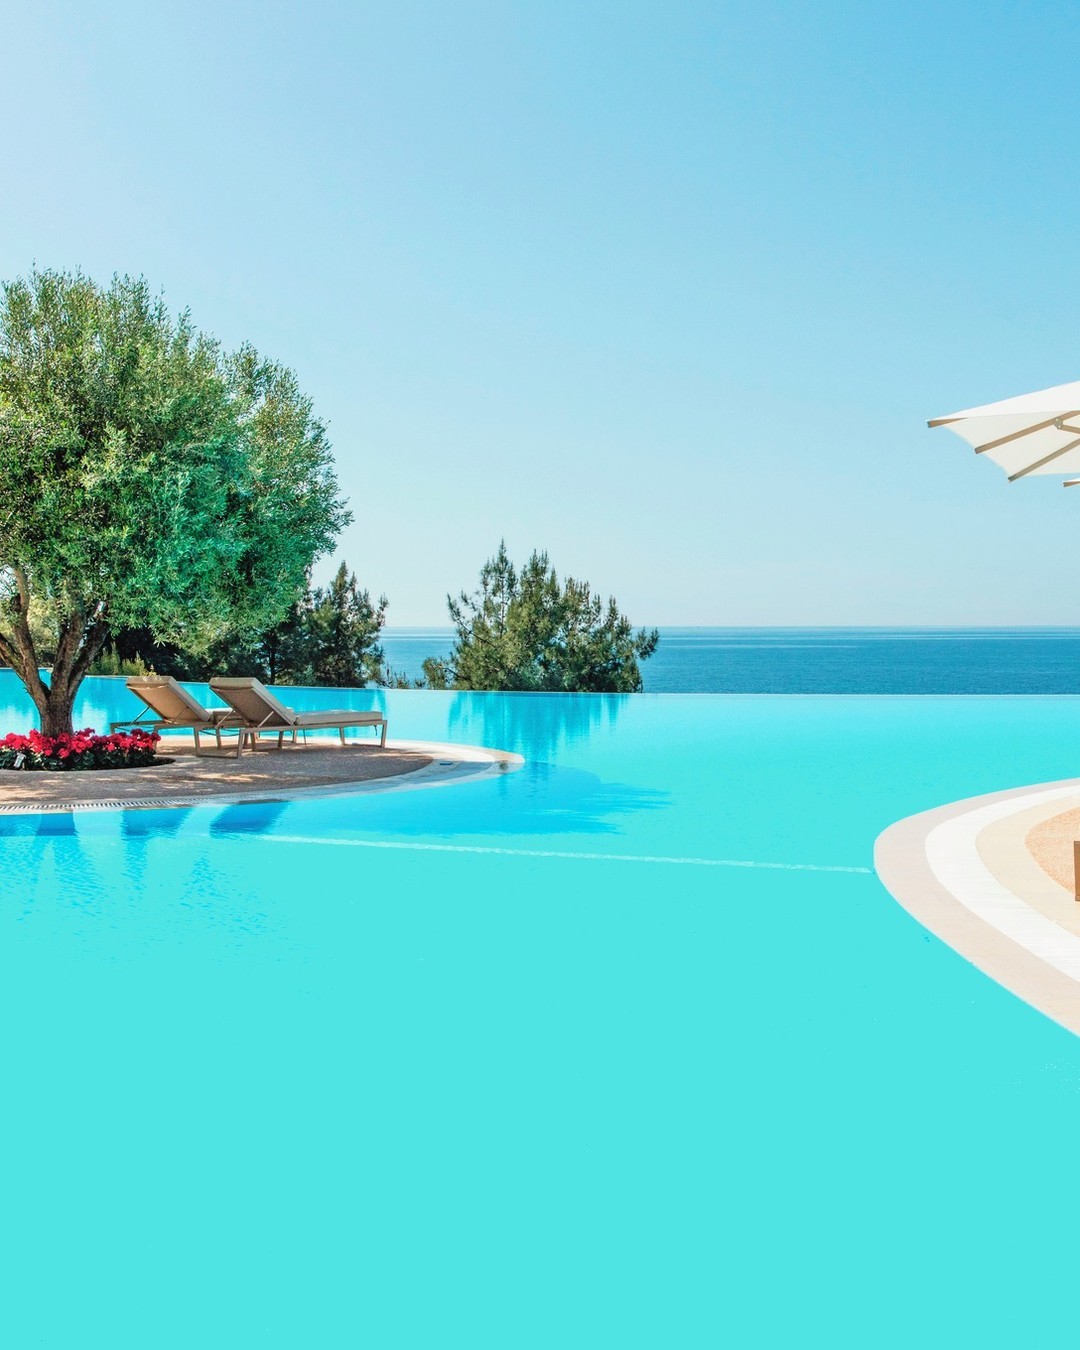 Enjoy the 350 metres of the unspoilt Blue Flag beach or the glistening infinity pool at Ikos Oceania